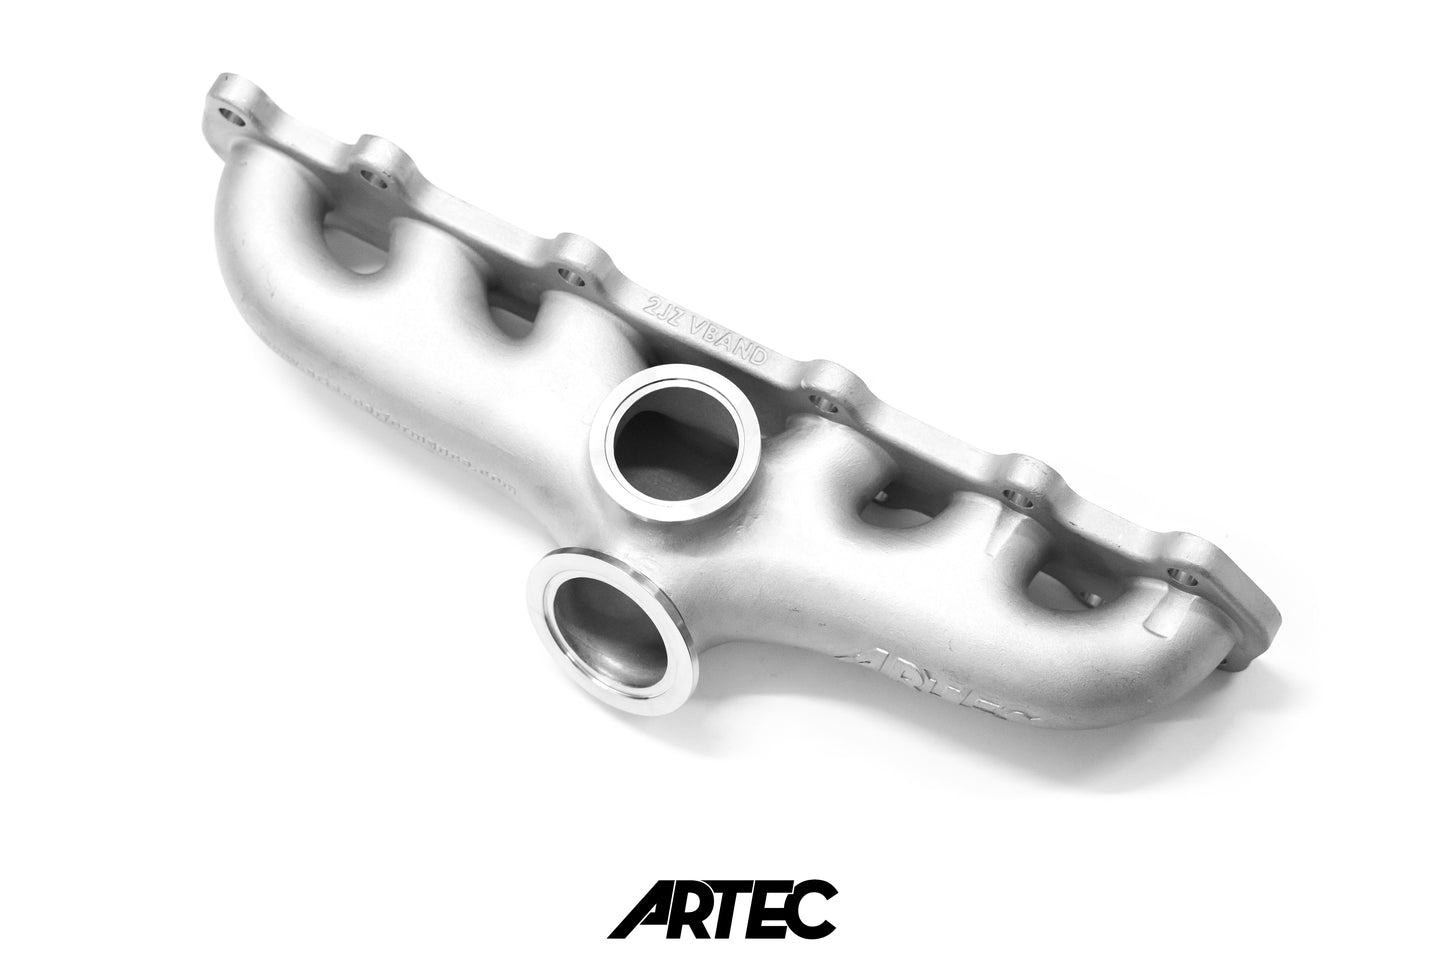 Artec Toyota 2JZ GTE V-band (Compact) Turbo Exhaust Manifold